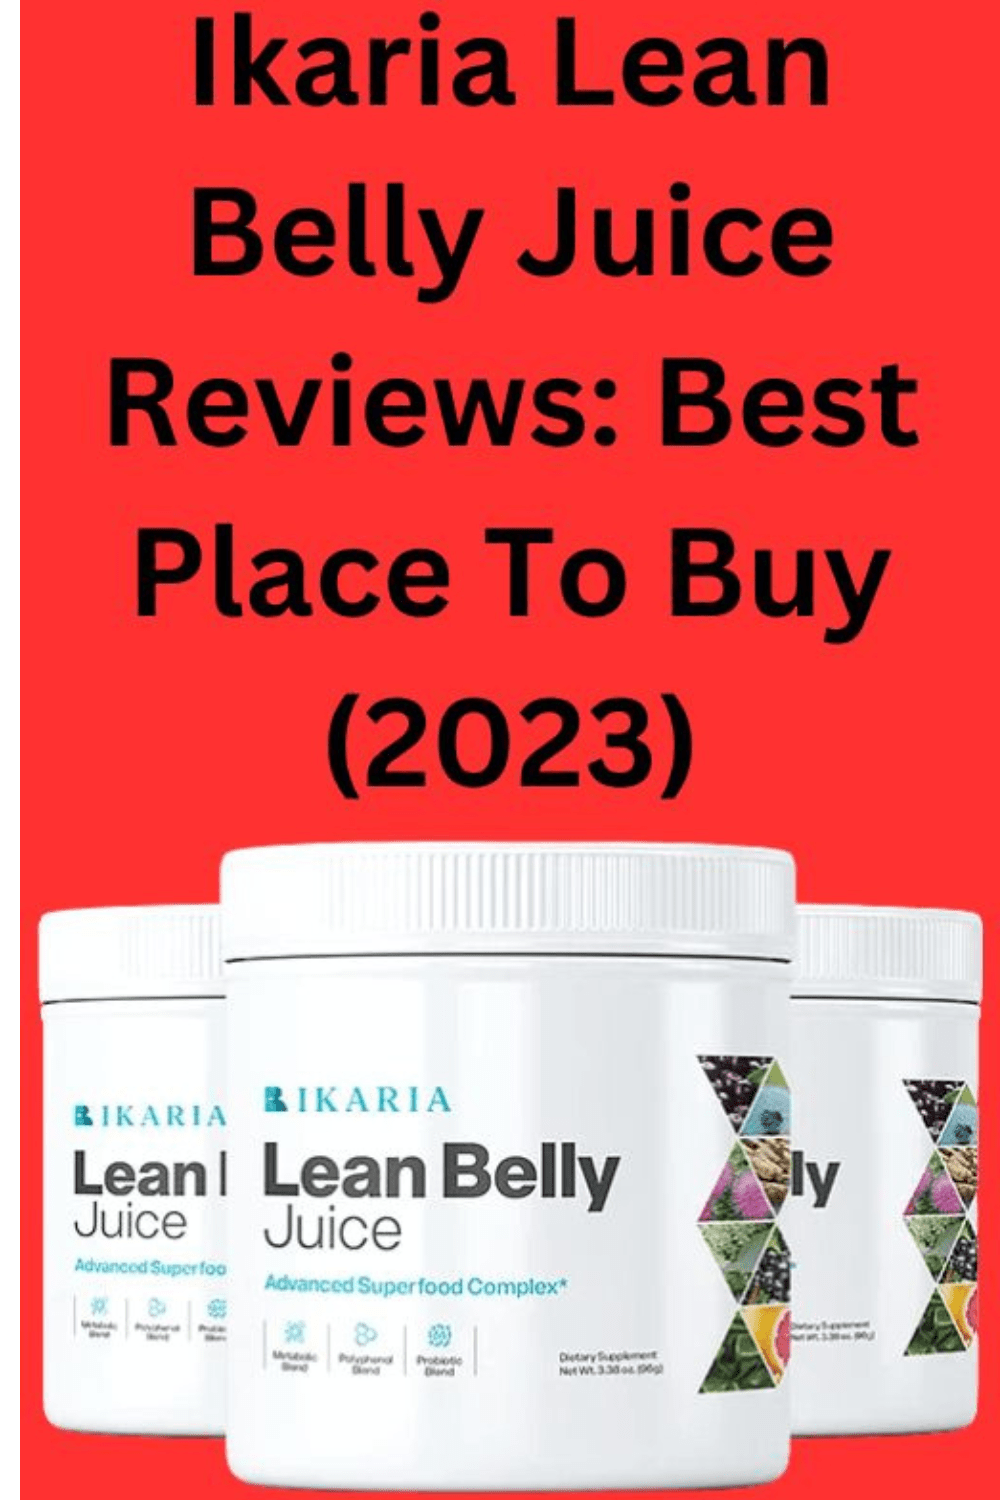 Ikaria Lean Belly Juice Reviews: Best Place To Buy (2023) pinterest preview image.